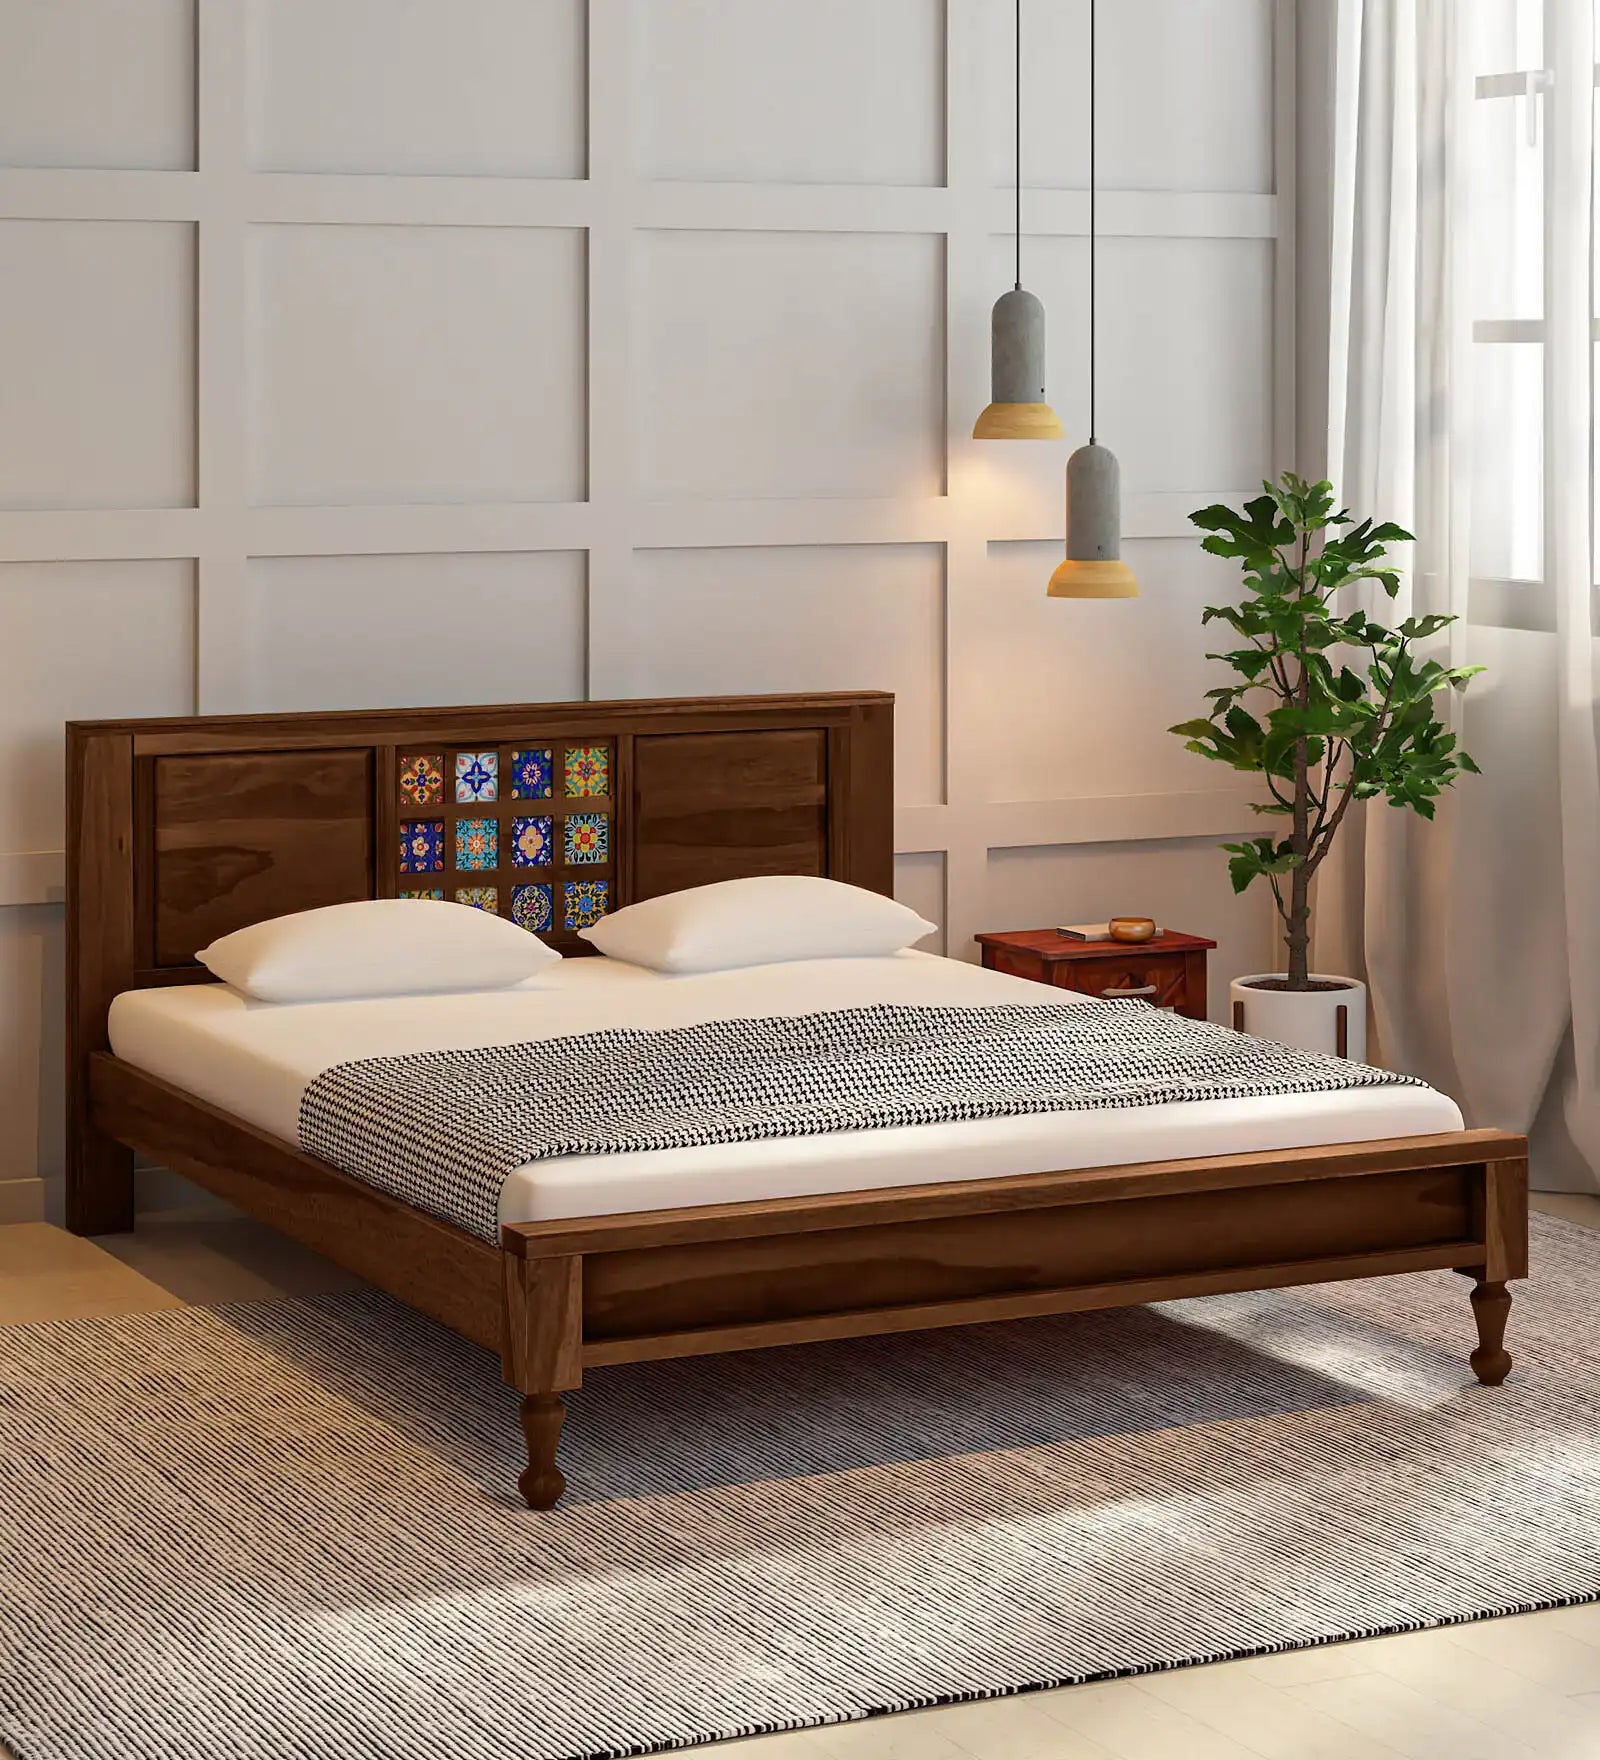 Anamika Contemporary Sheesham Wood Queen Size Beds